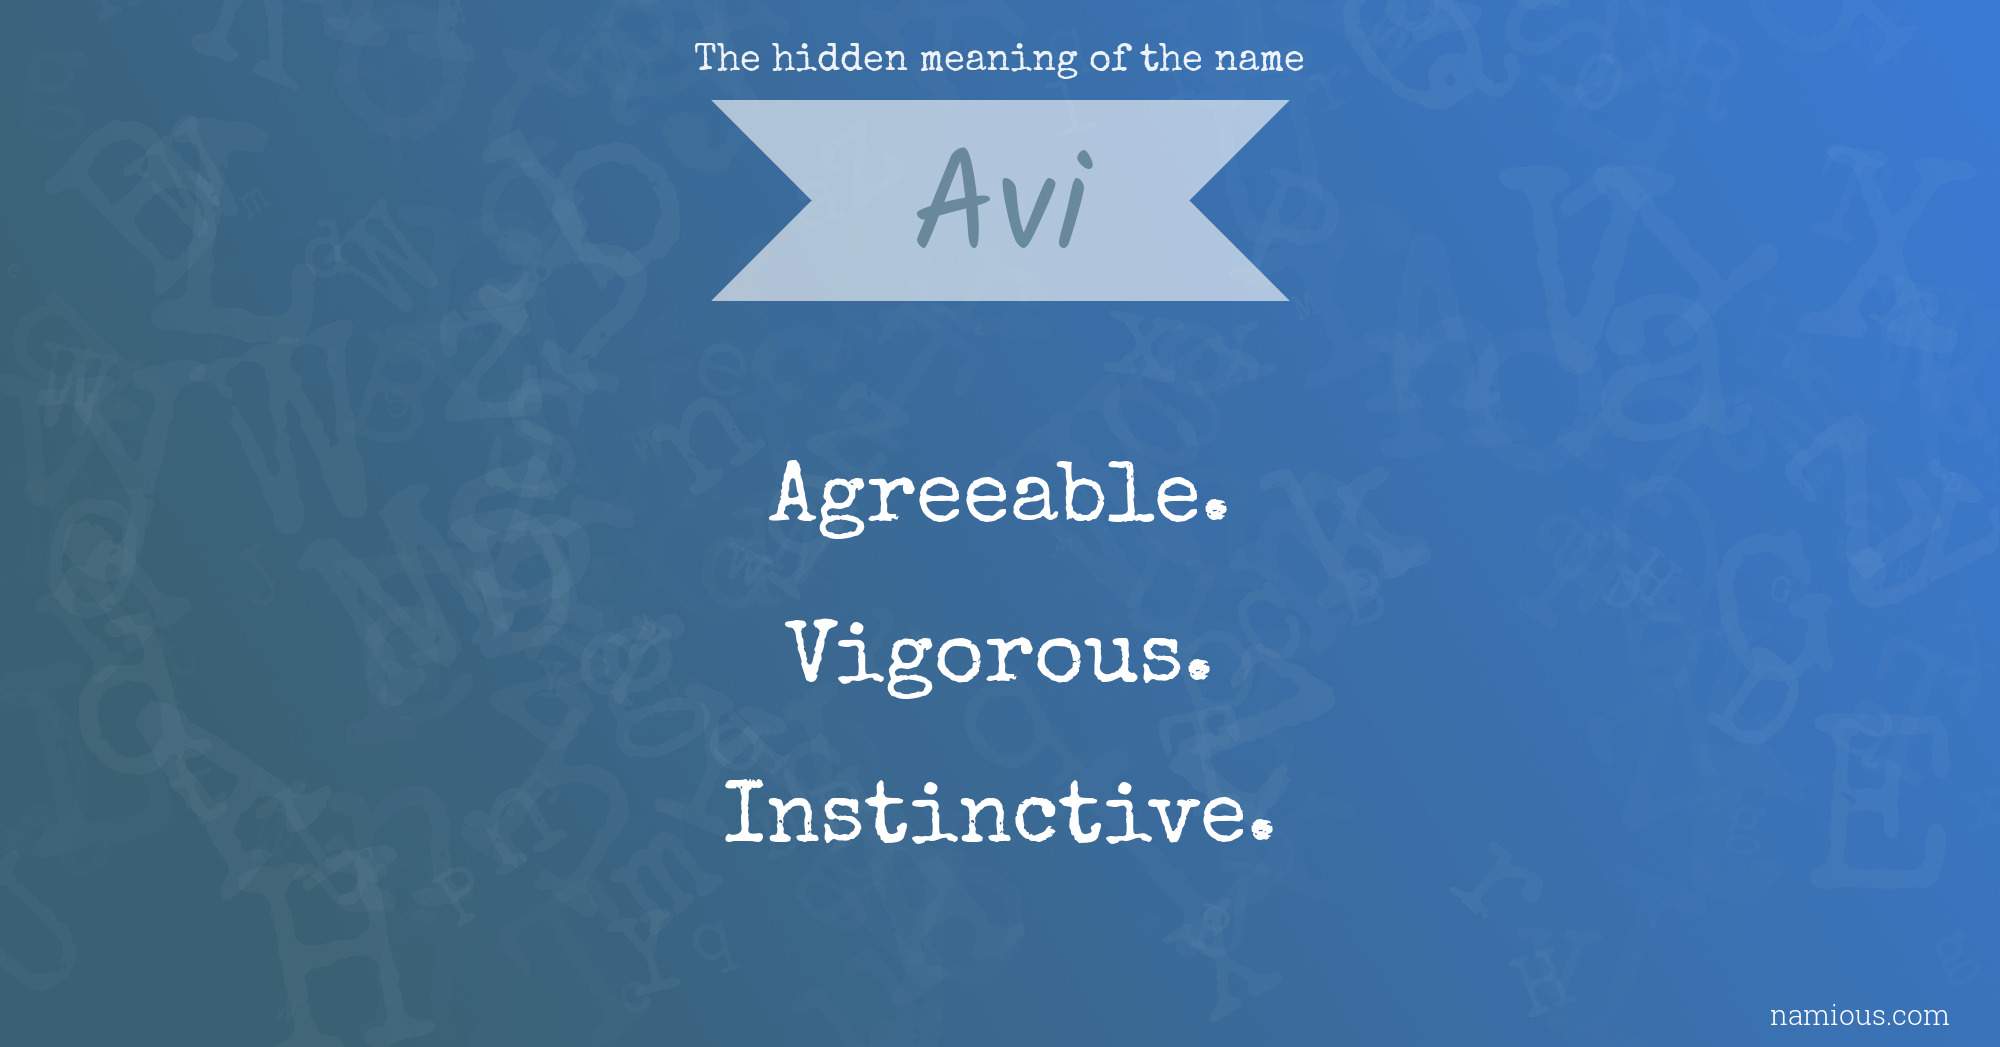 The hidden meaning of the name Avi